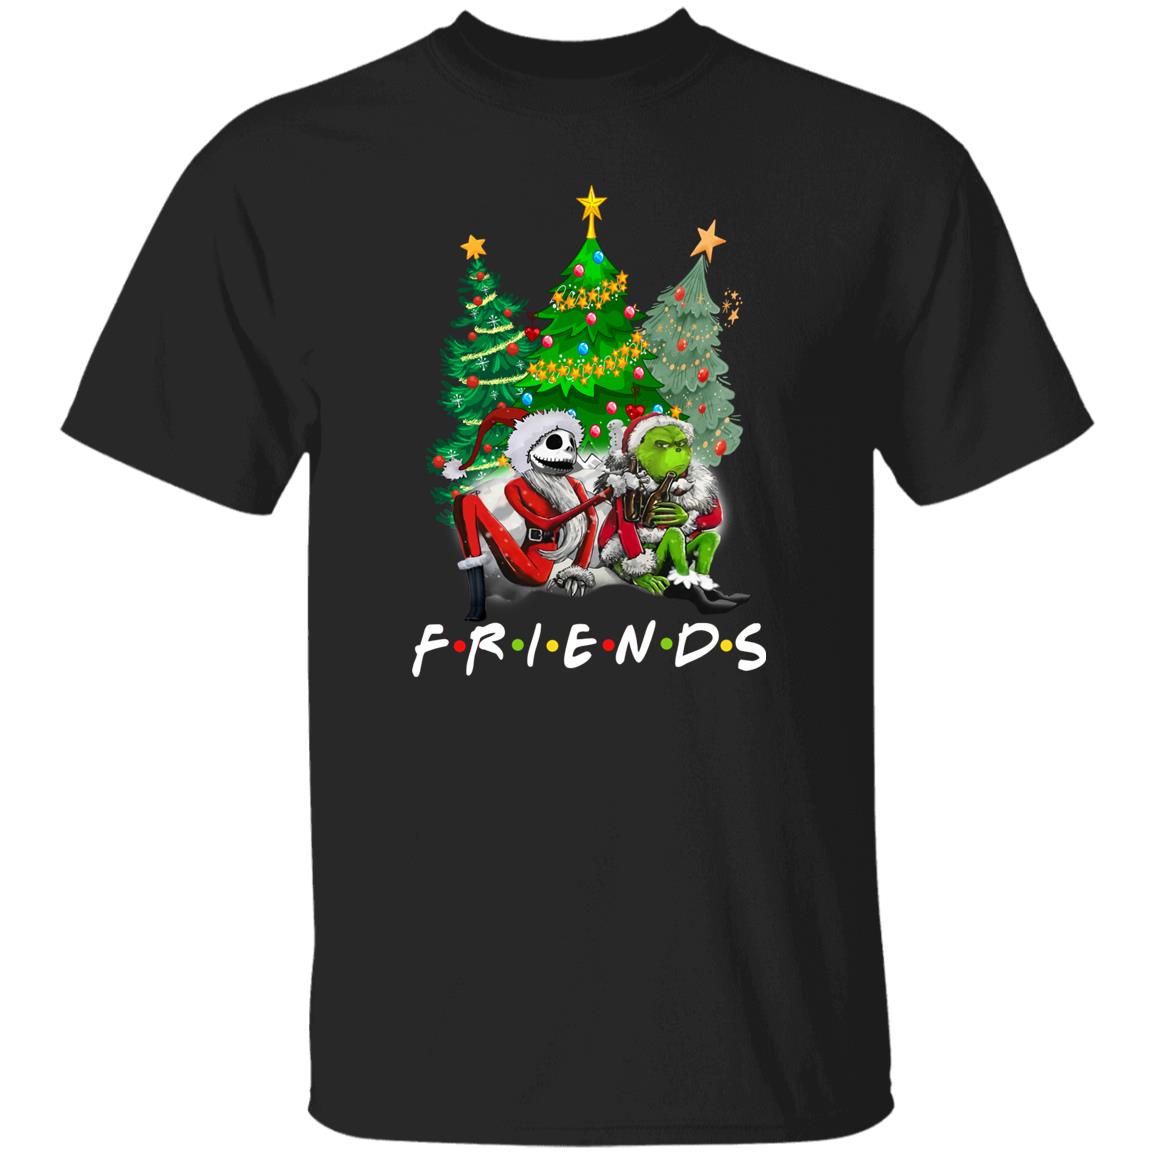 Friends Merry Christmas Jack Skellington and Grinch Shirt